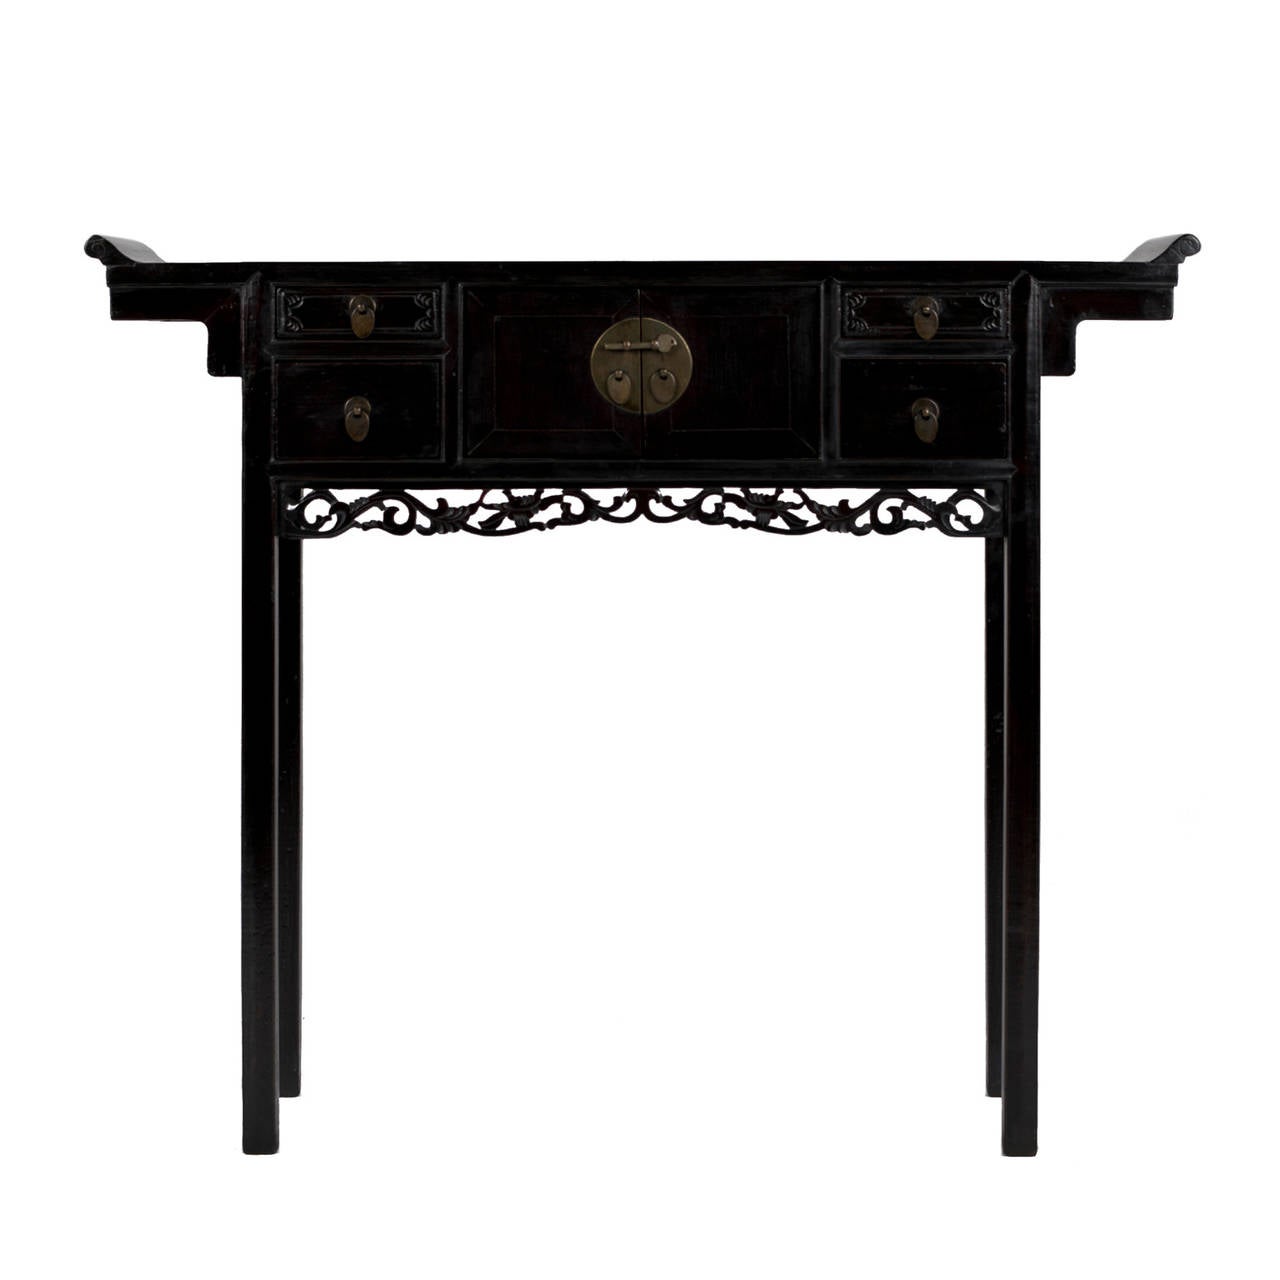 Liumu petite altar coffer with everted ends, drawers and carved trailing vine apron.